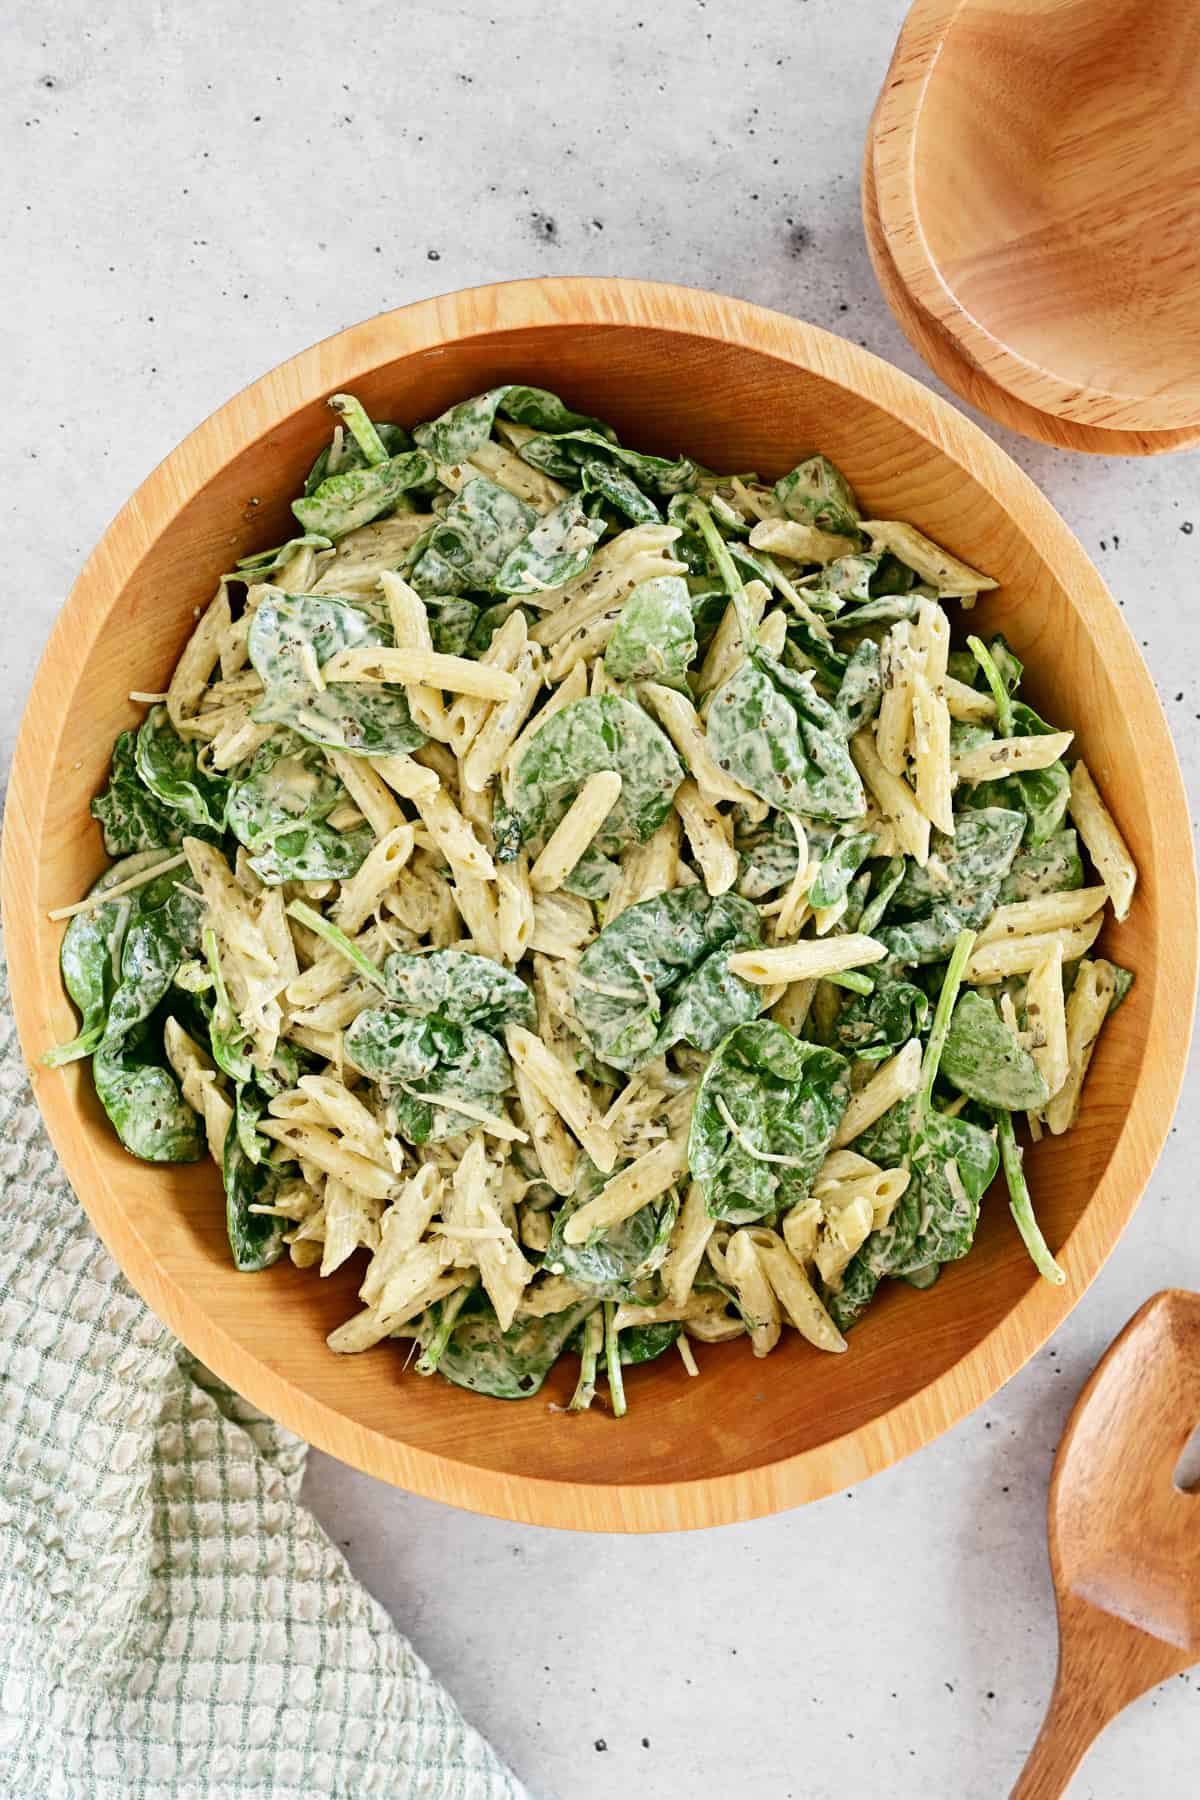 Spinach pasta salad in a wooden bowl.